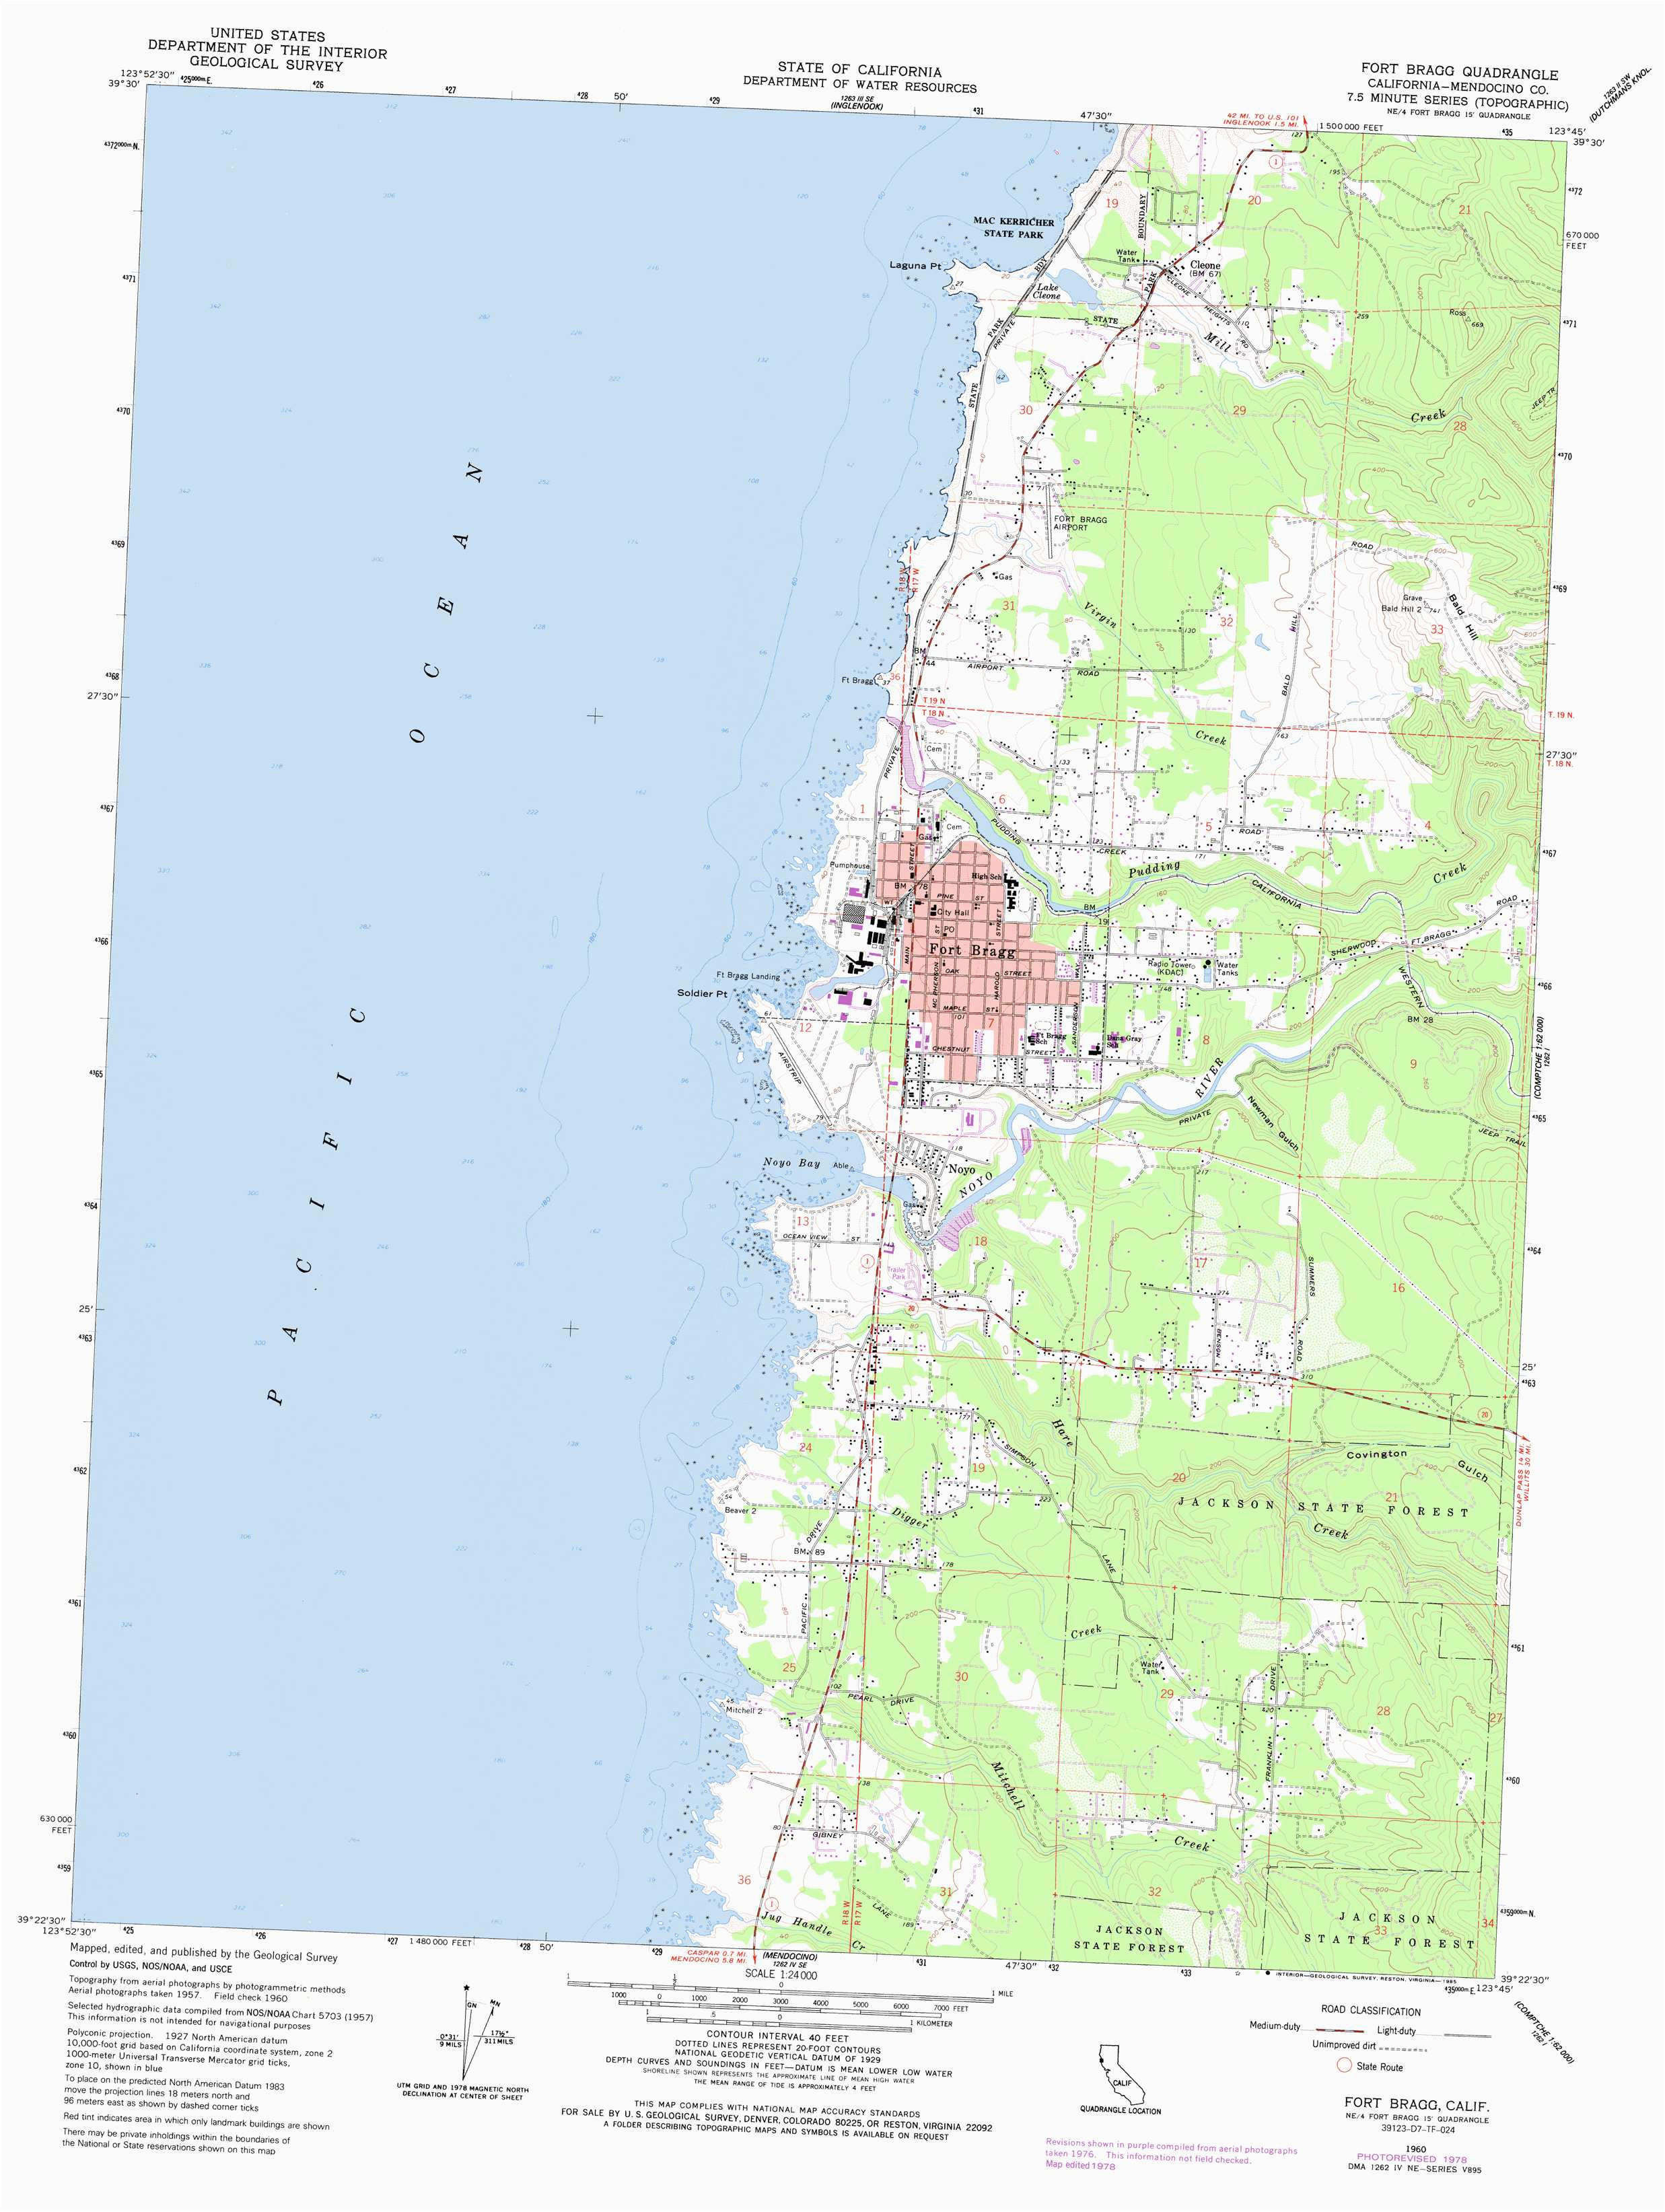 California Earthquakes today Map Od Picture Collection Website fort Bragg California Map Reference Hd